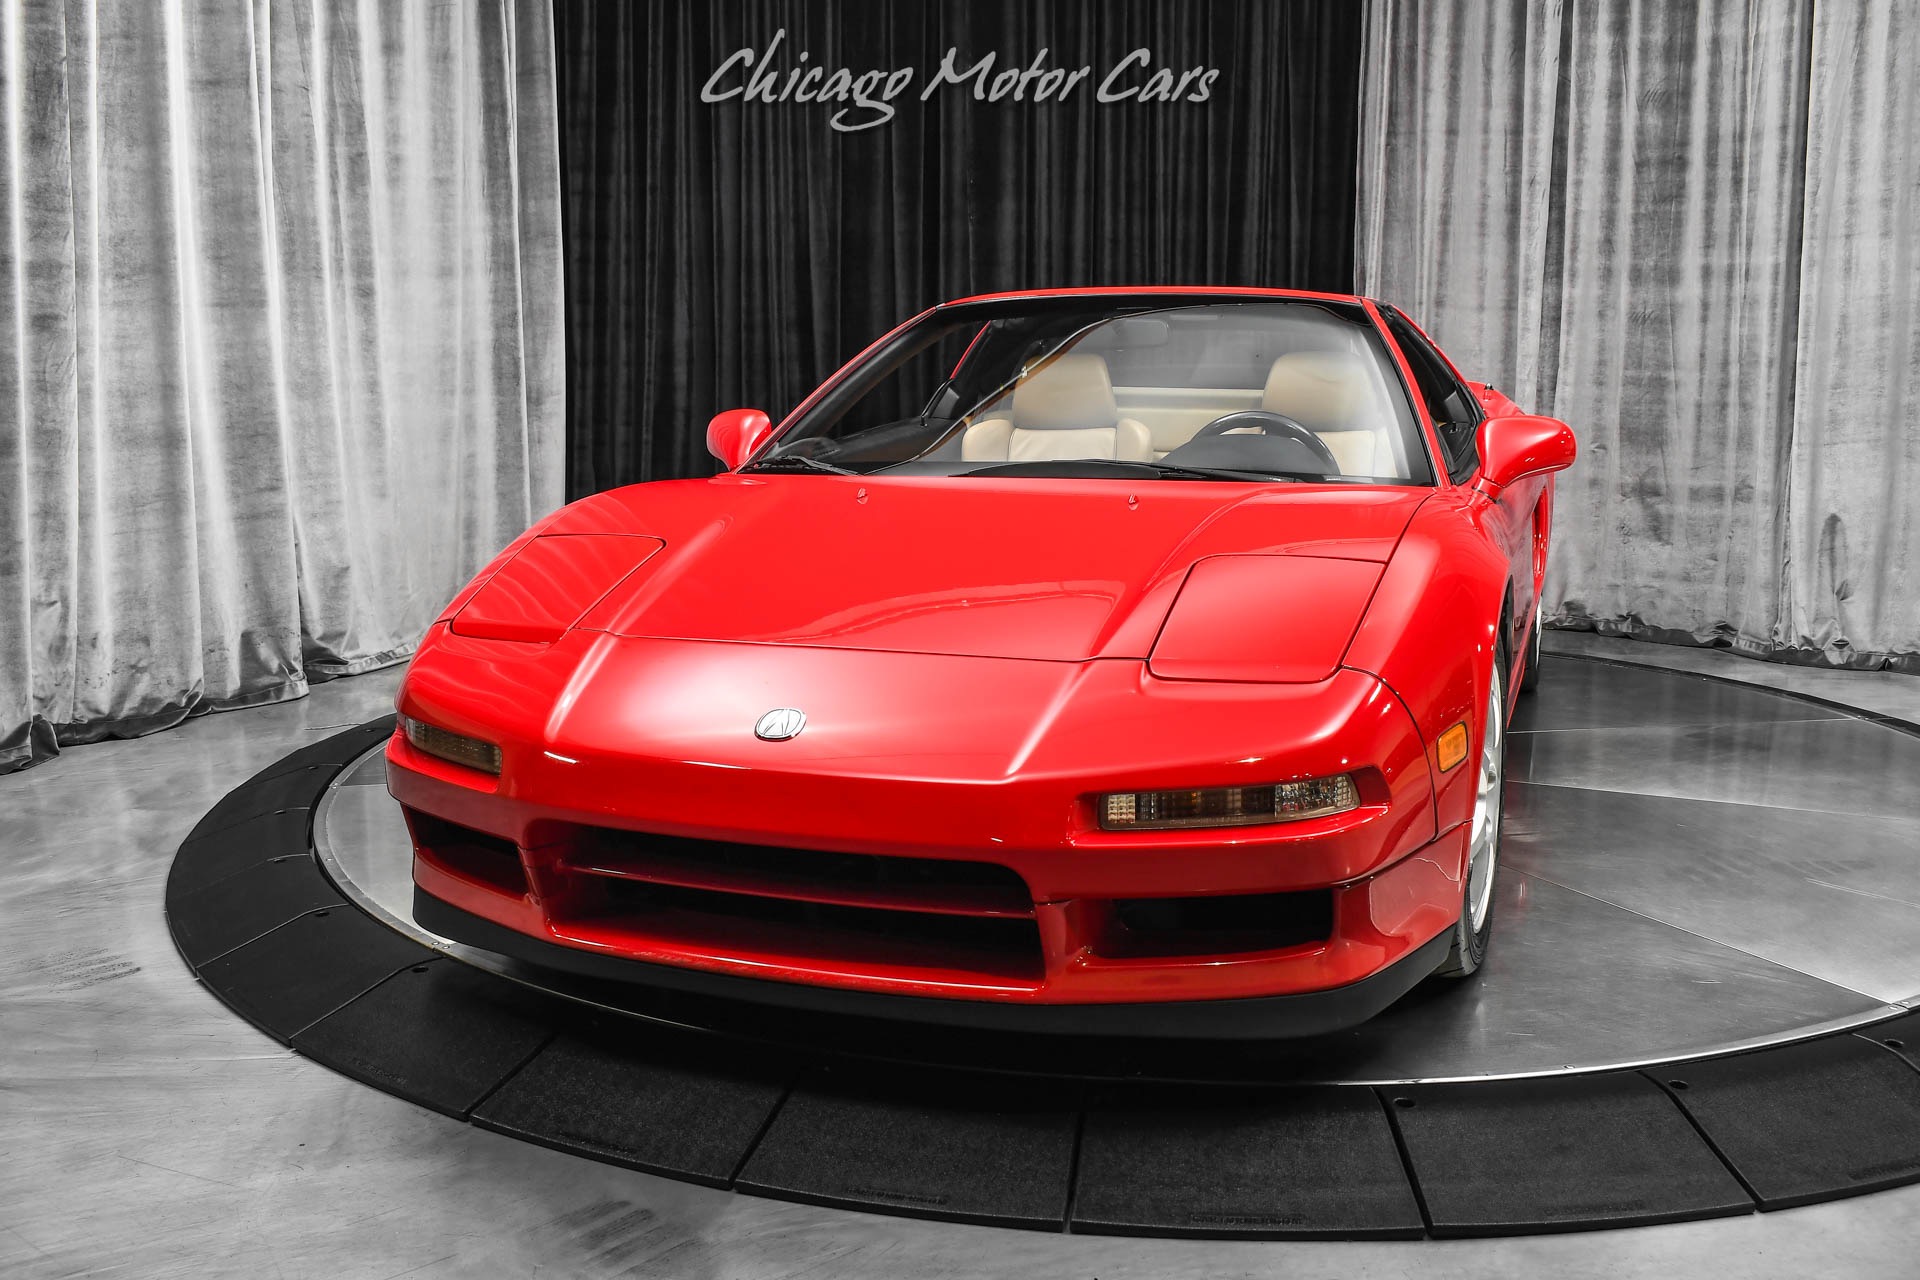 Used 1996 Acura NSX NSX-T 5-Speed Manual! Pristine Shape! Tons of 